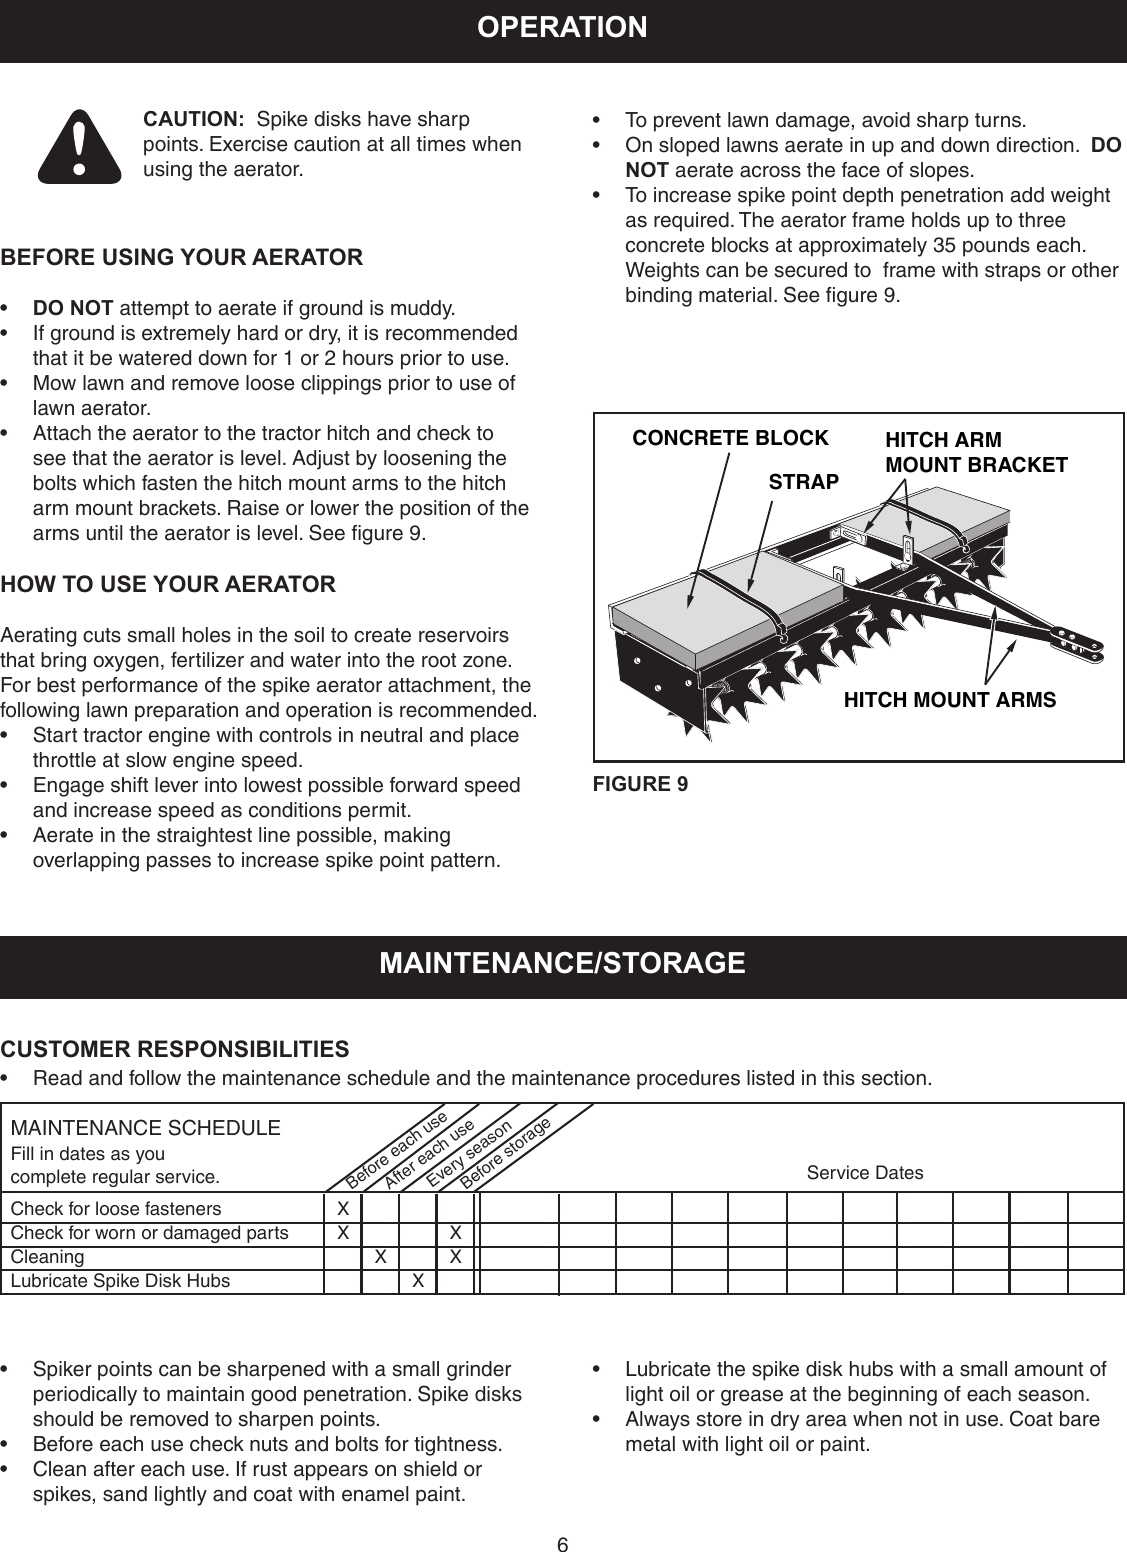 Page 6 of 8 - Craftsman Craftsman-36-In-Spike-Aerator-Owners-Manual-  Craftsman-36-in-spike-aerator-owners-manual